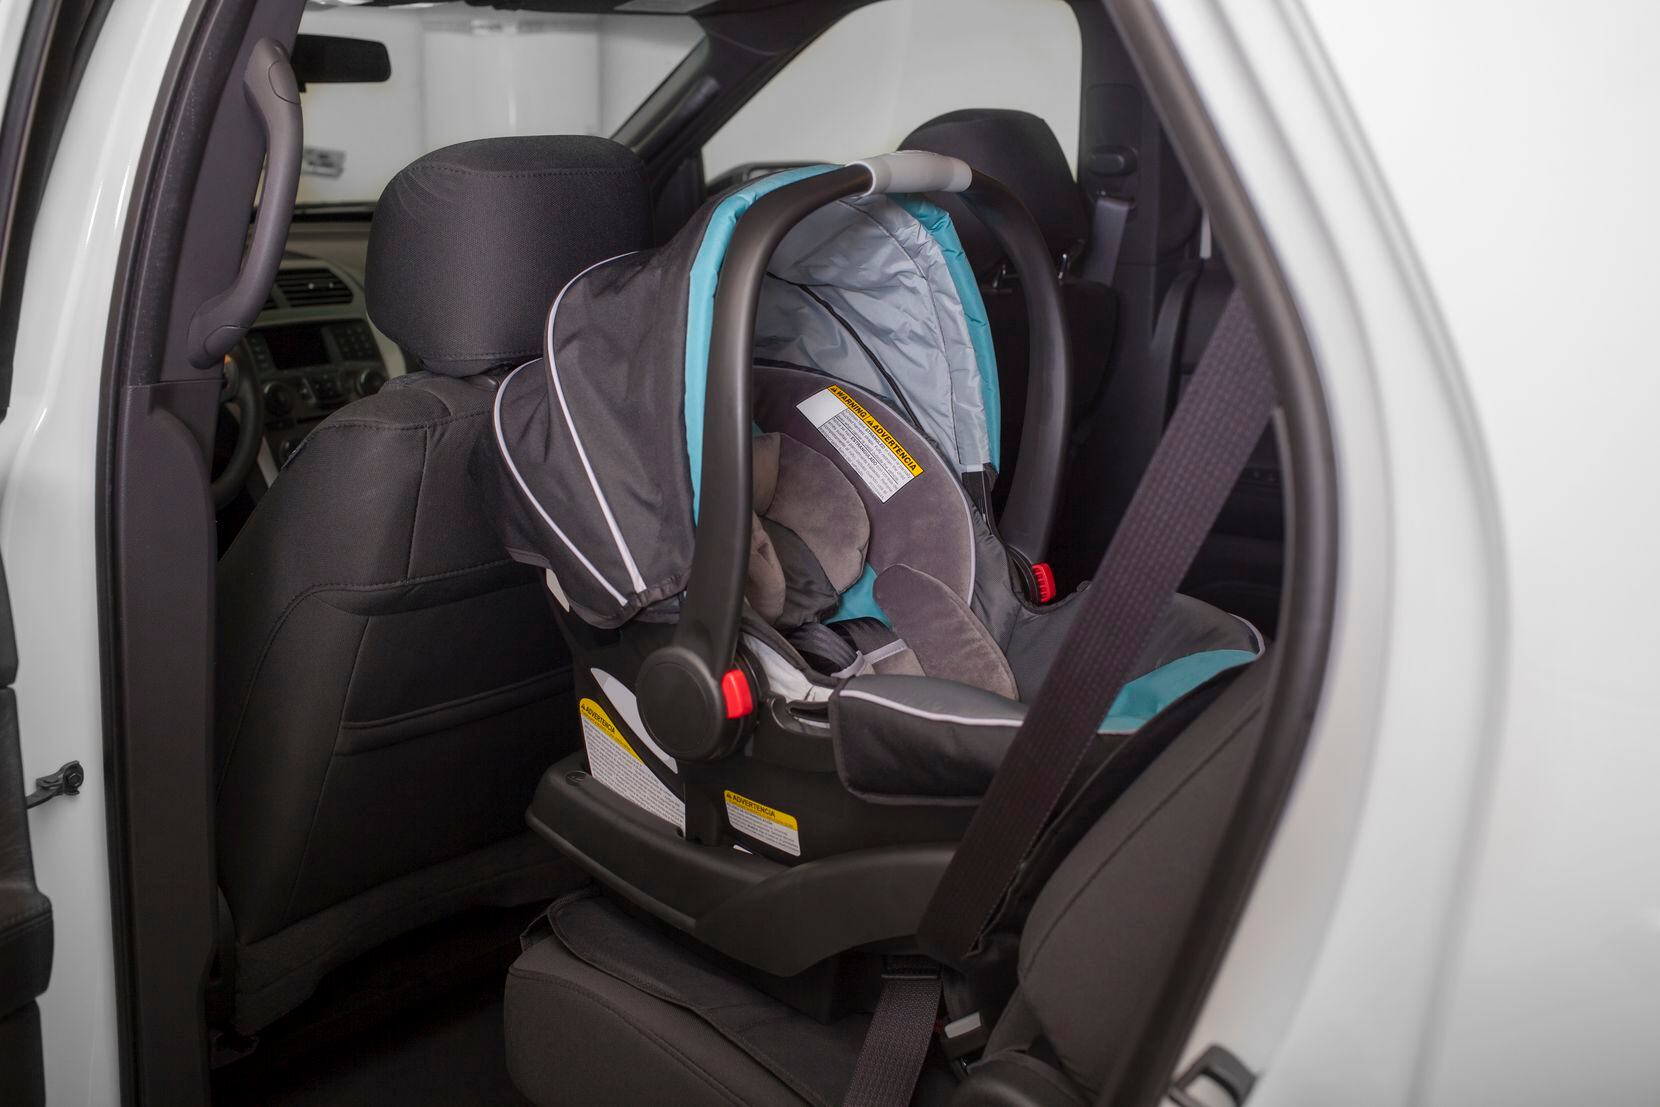 Everything You Need to Know About Car Seat Safety in the US